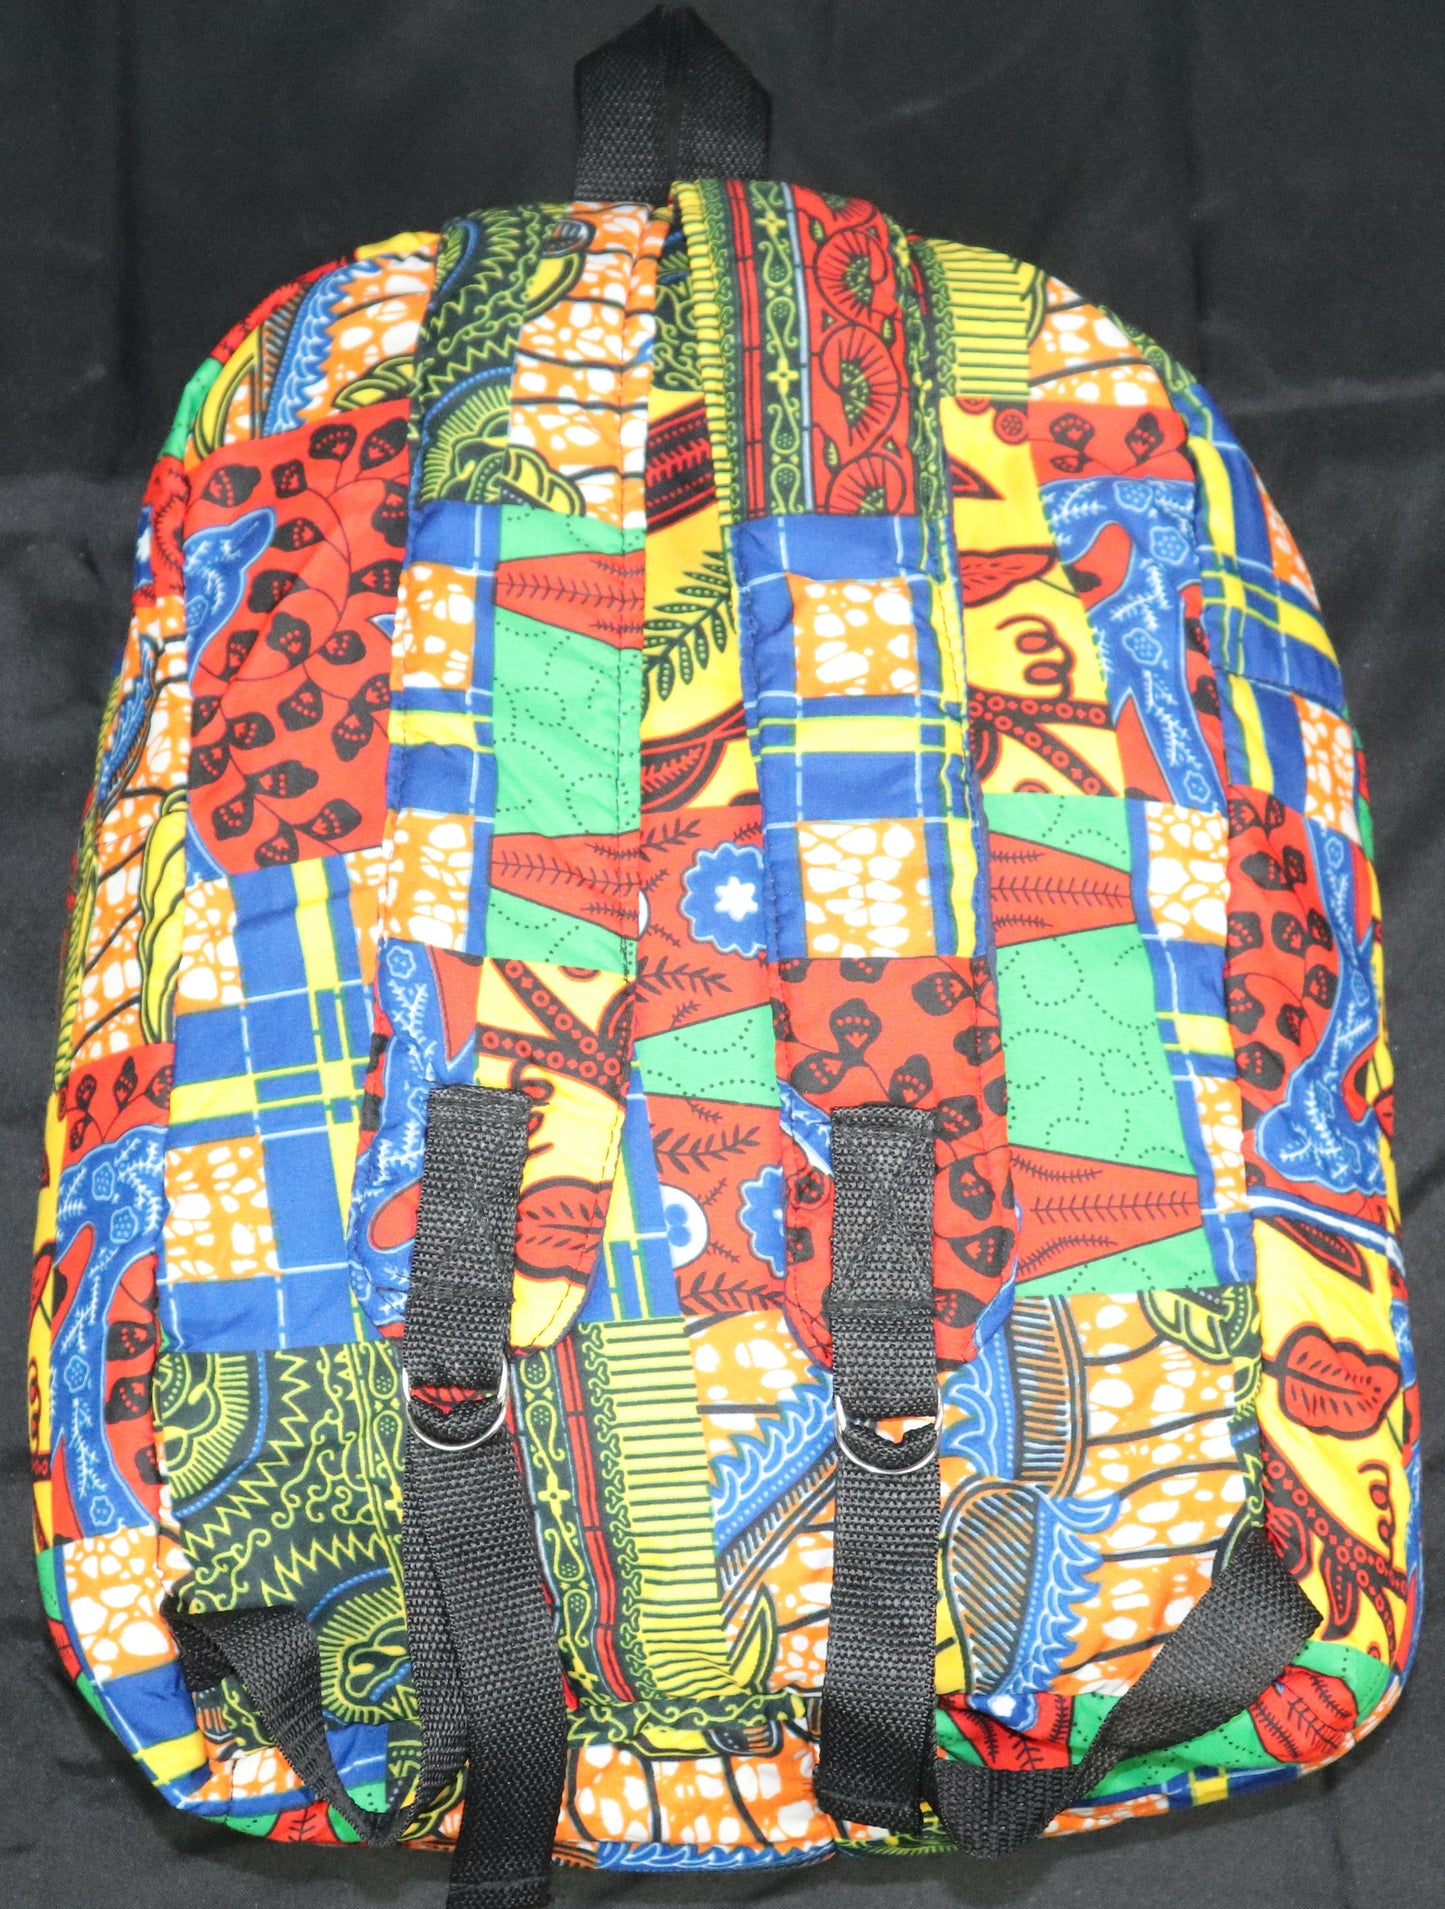 Handcrafted patchwork Ankara fabric backpack. Made in Ghana.